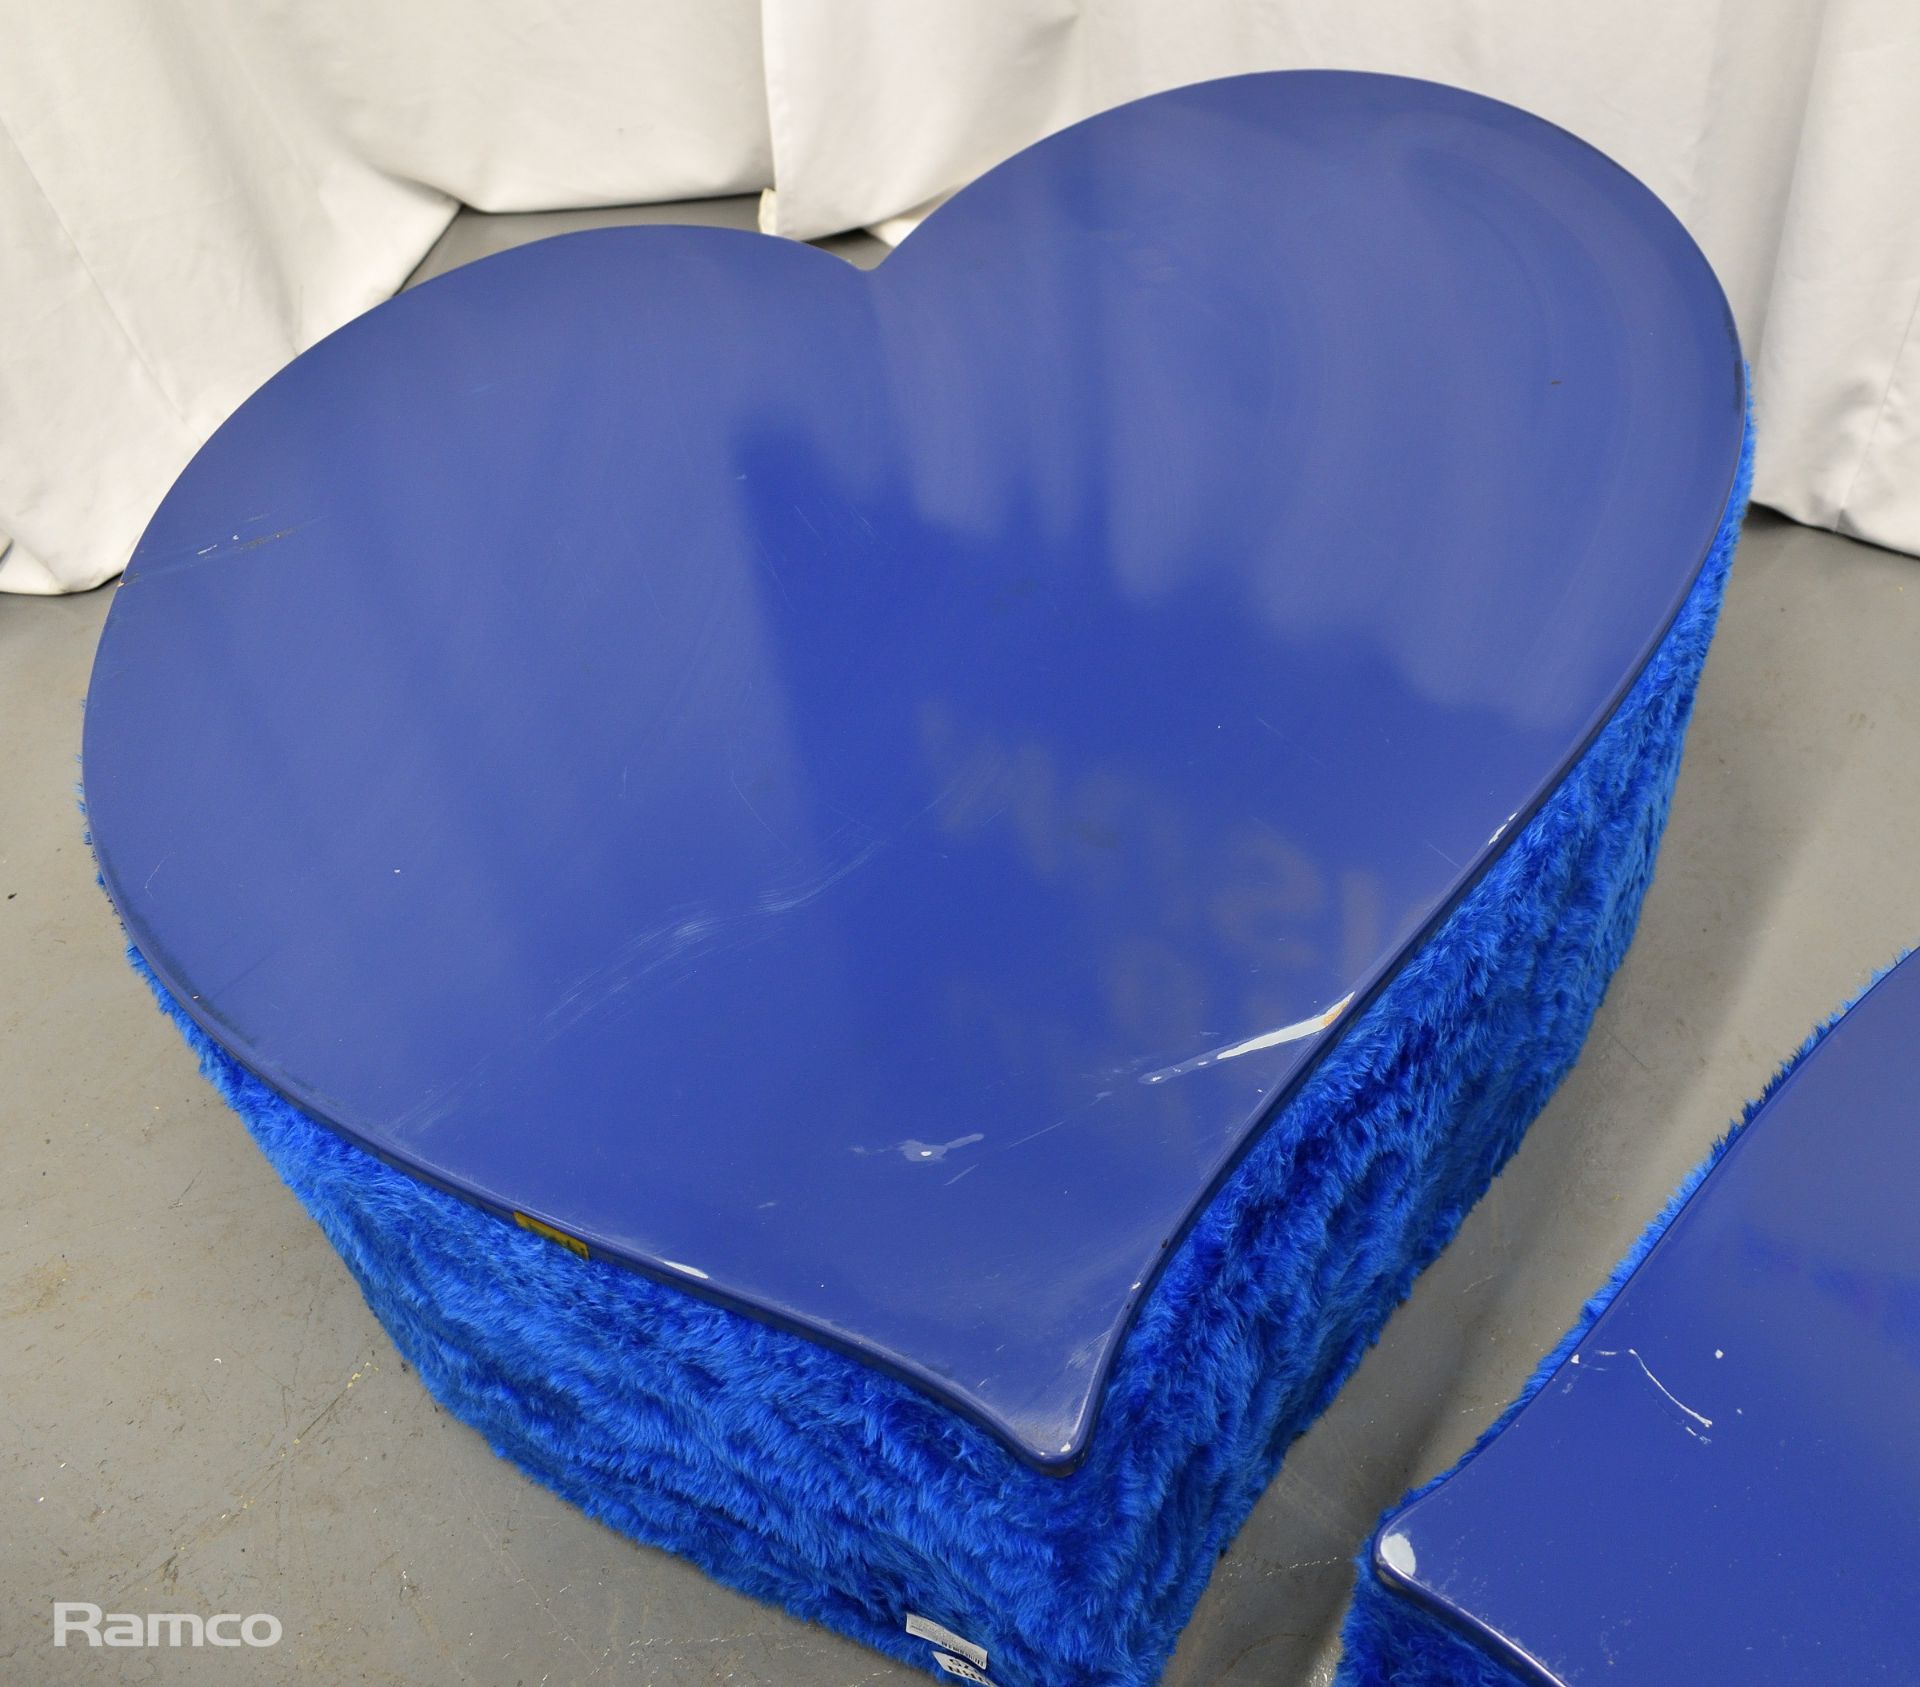 4x Asymmetrical heart shaped blue fur-covered wooden tables from countries' seating area - Image 7 of 18